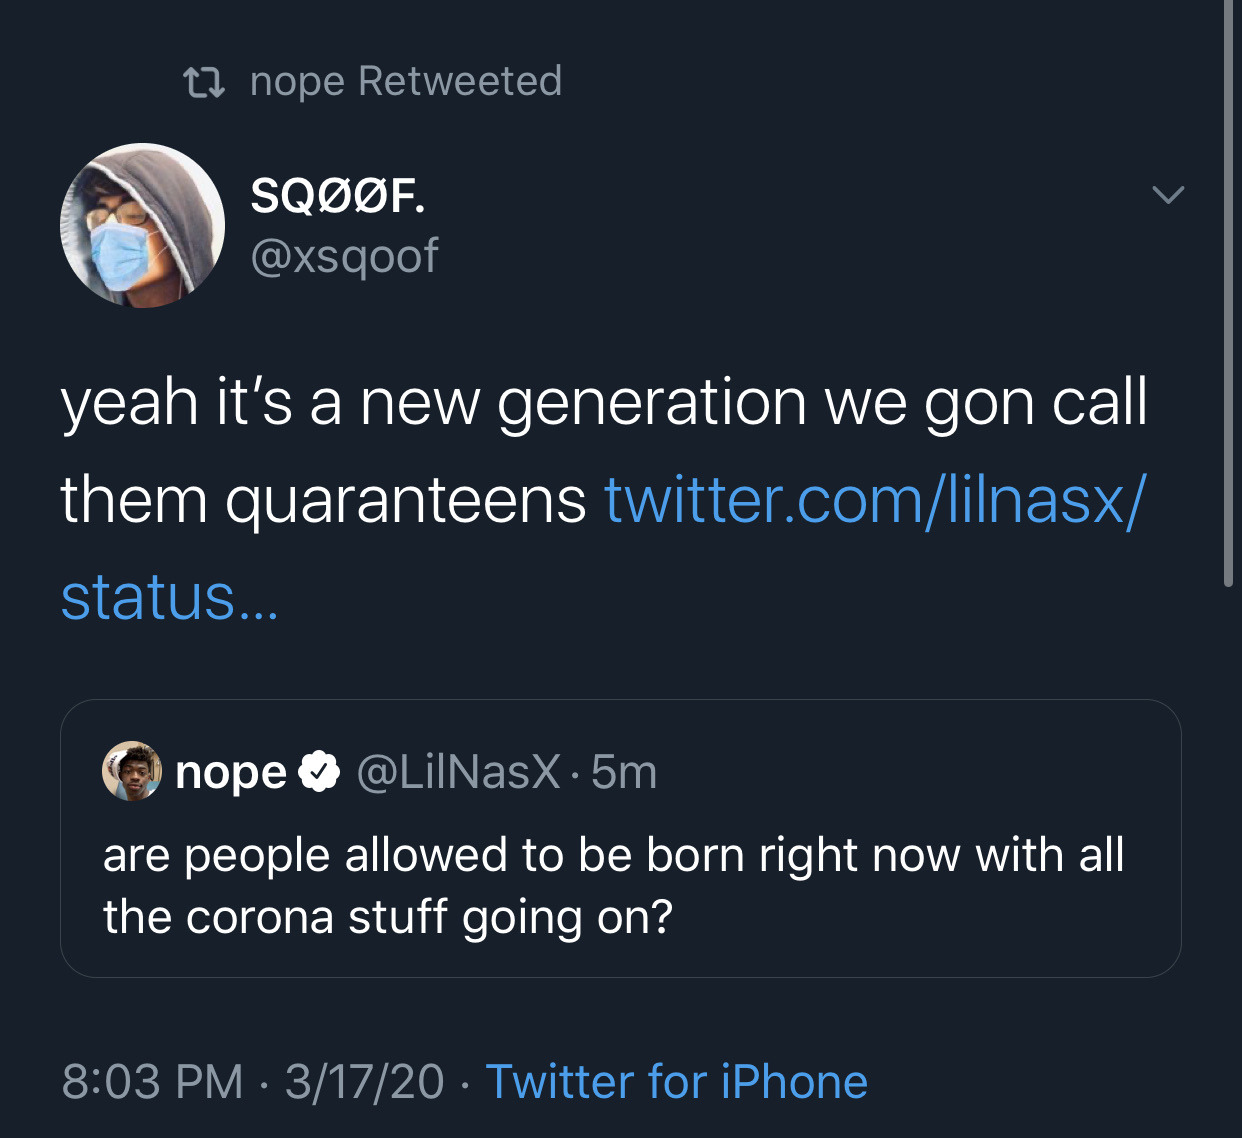 screenshot - 22 nope Retweeted, Sqf. yeah it's a new generation we gon call them quaranteens twitter.comlilnasx status... Onope .5m are people allowed to be born right now with all the corona stuff going on? 31720 Twitter for iPhone